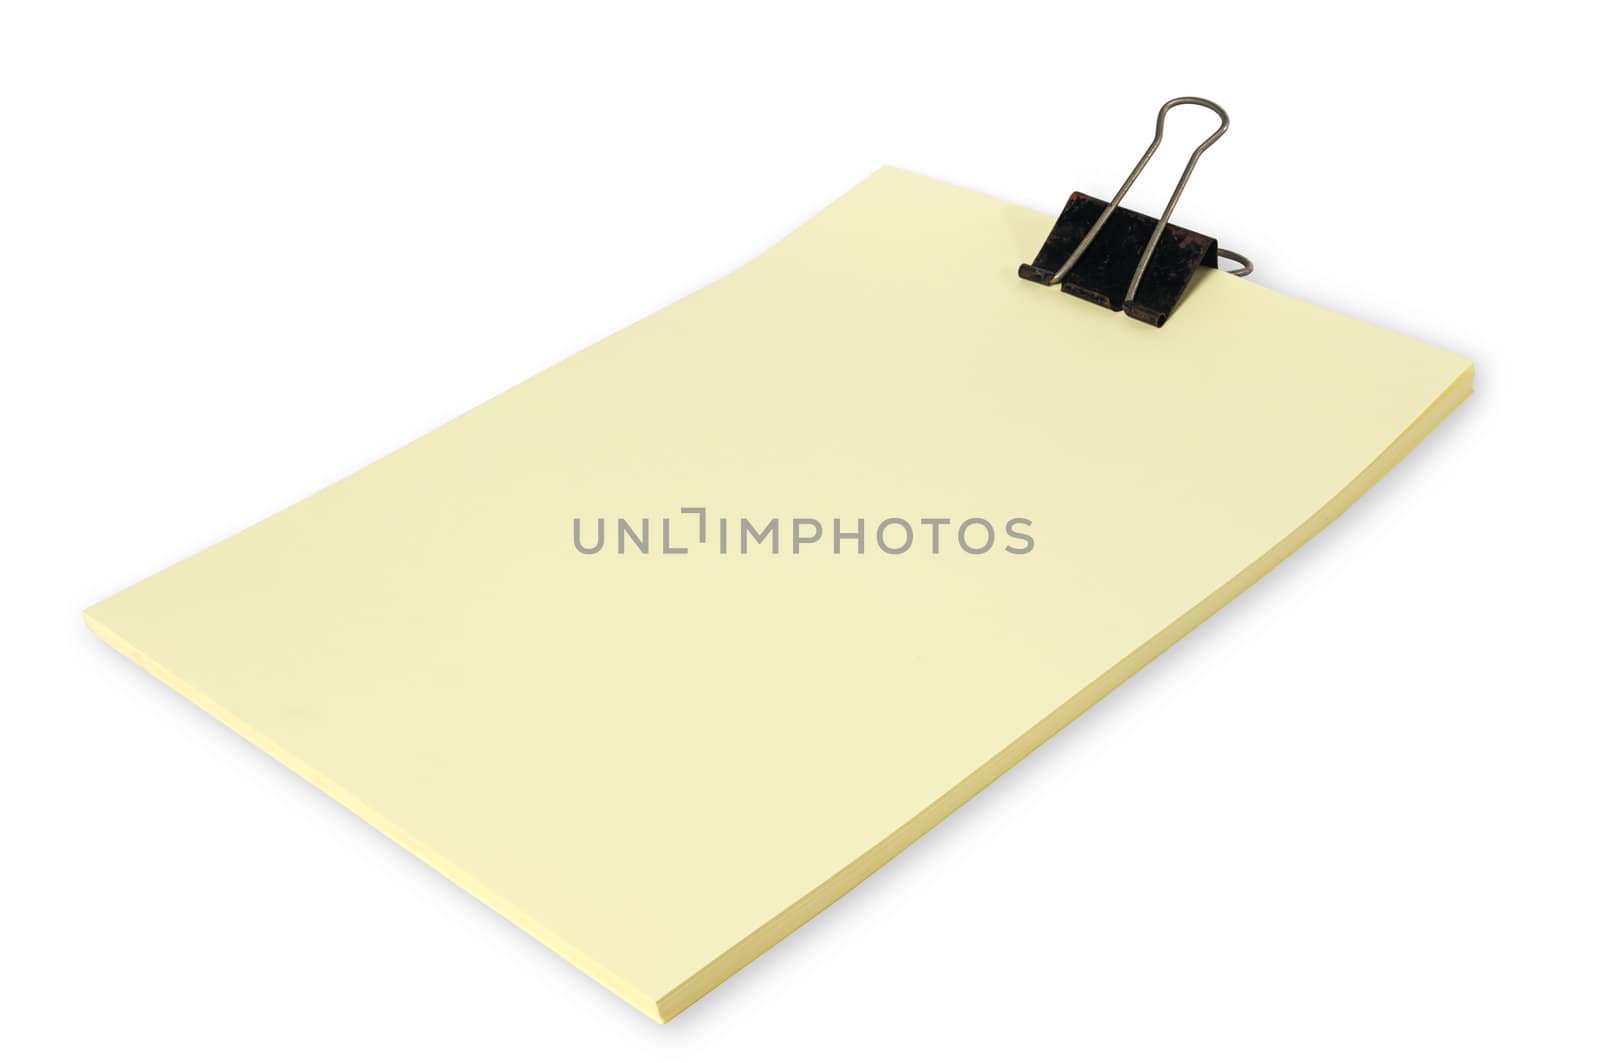 Black clip and Yellow blank note paper